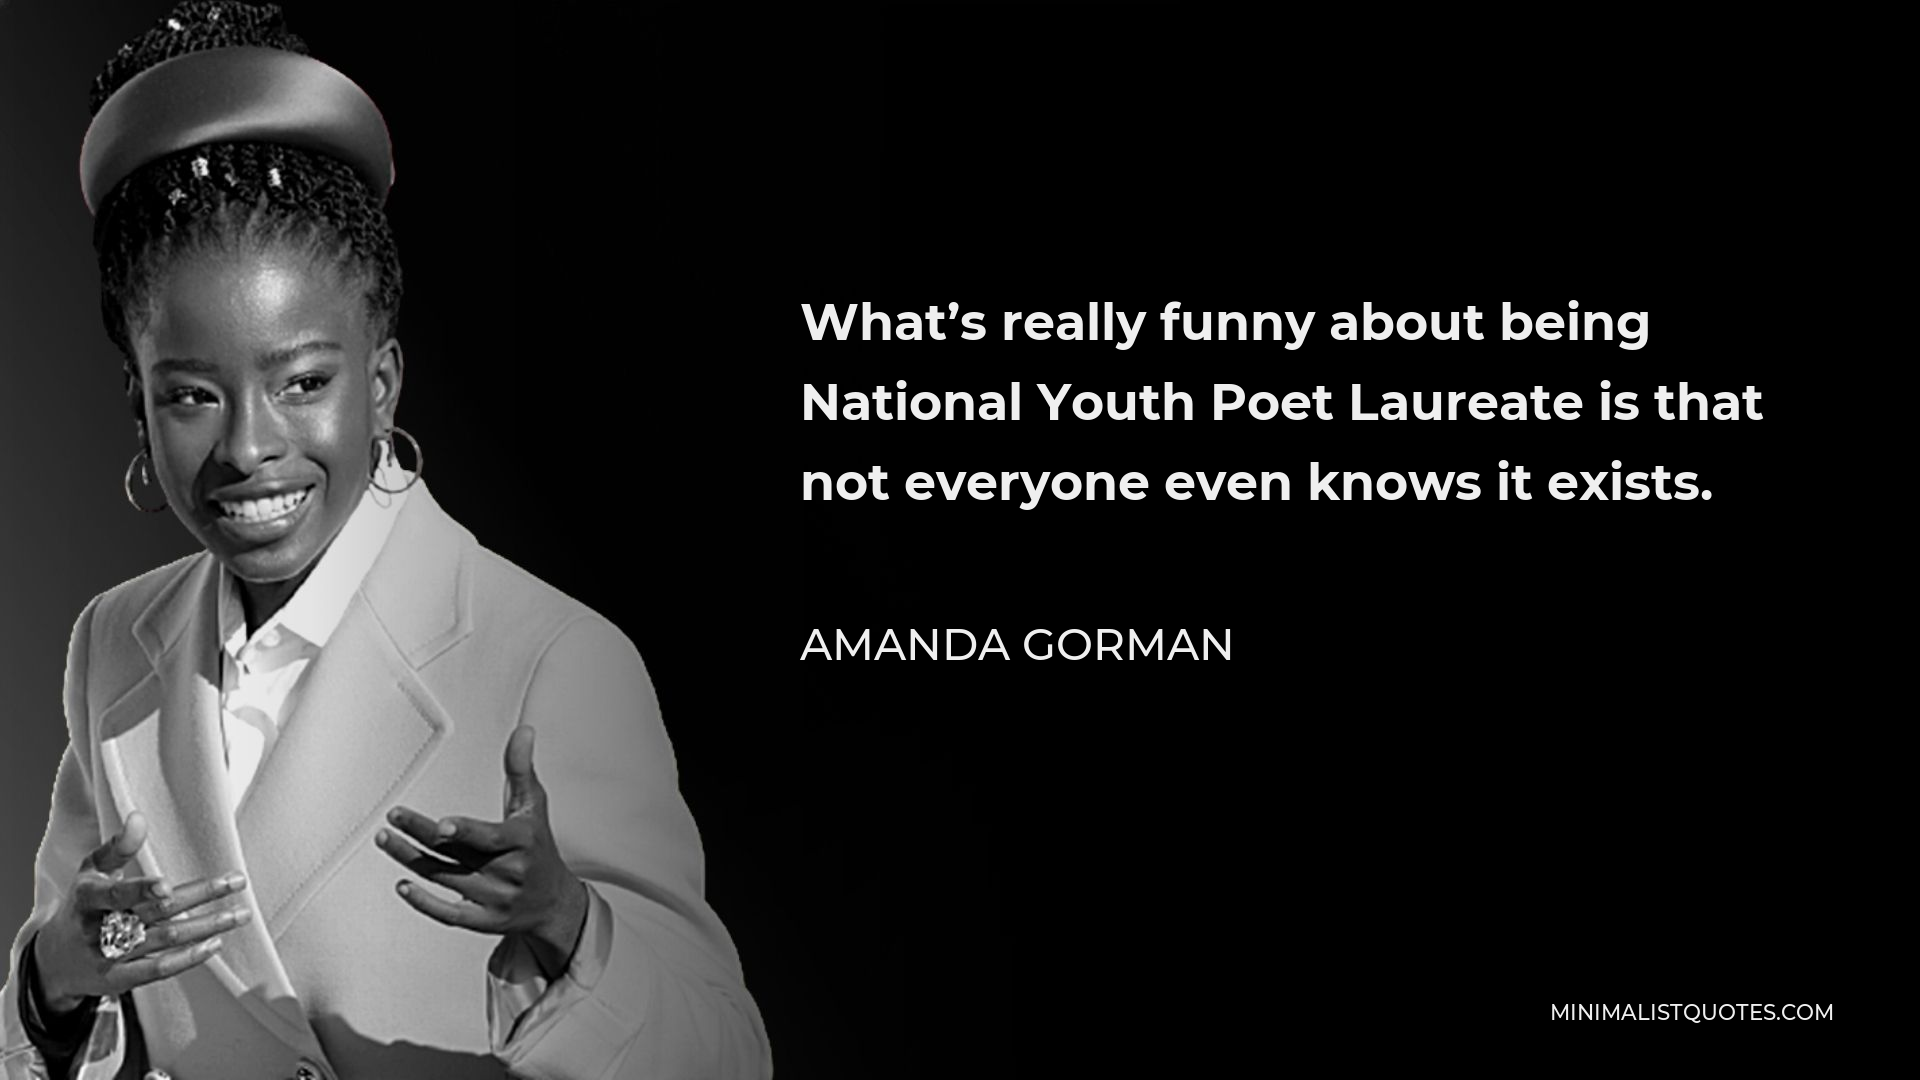 Amanda Gorman Quote - What’s really funny about being National Youth Poet Laureate is that not everyone even knows it exists.